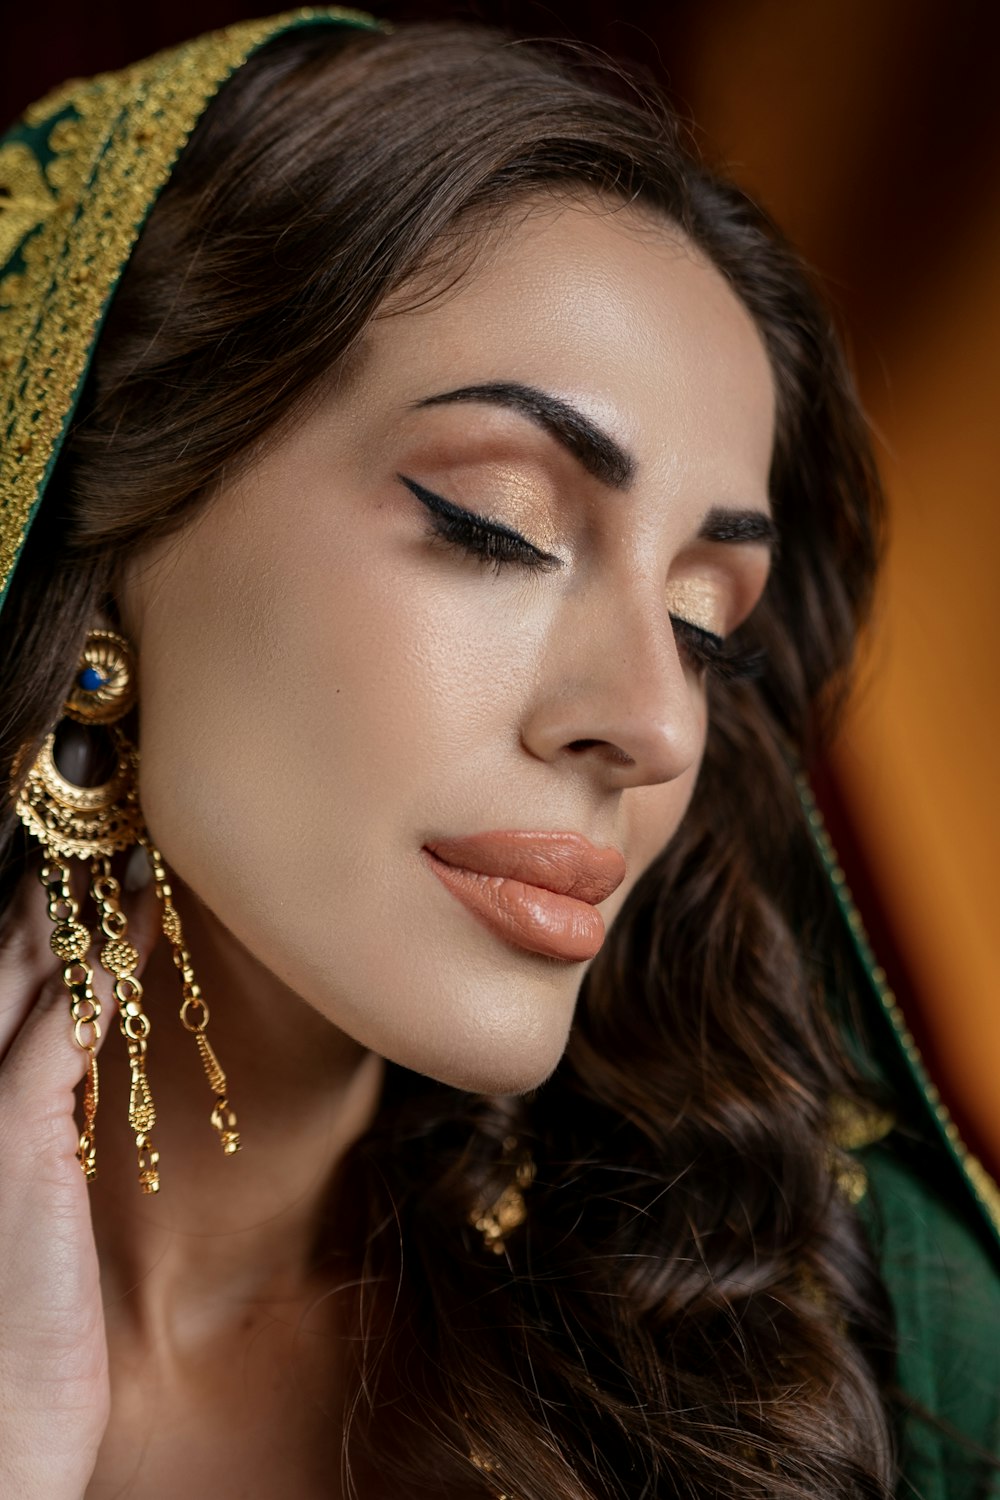 a woman wearing a green veil and gold earrings